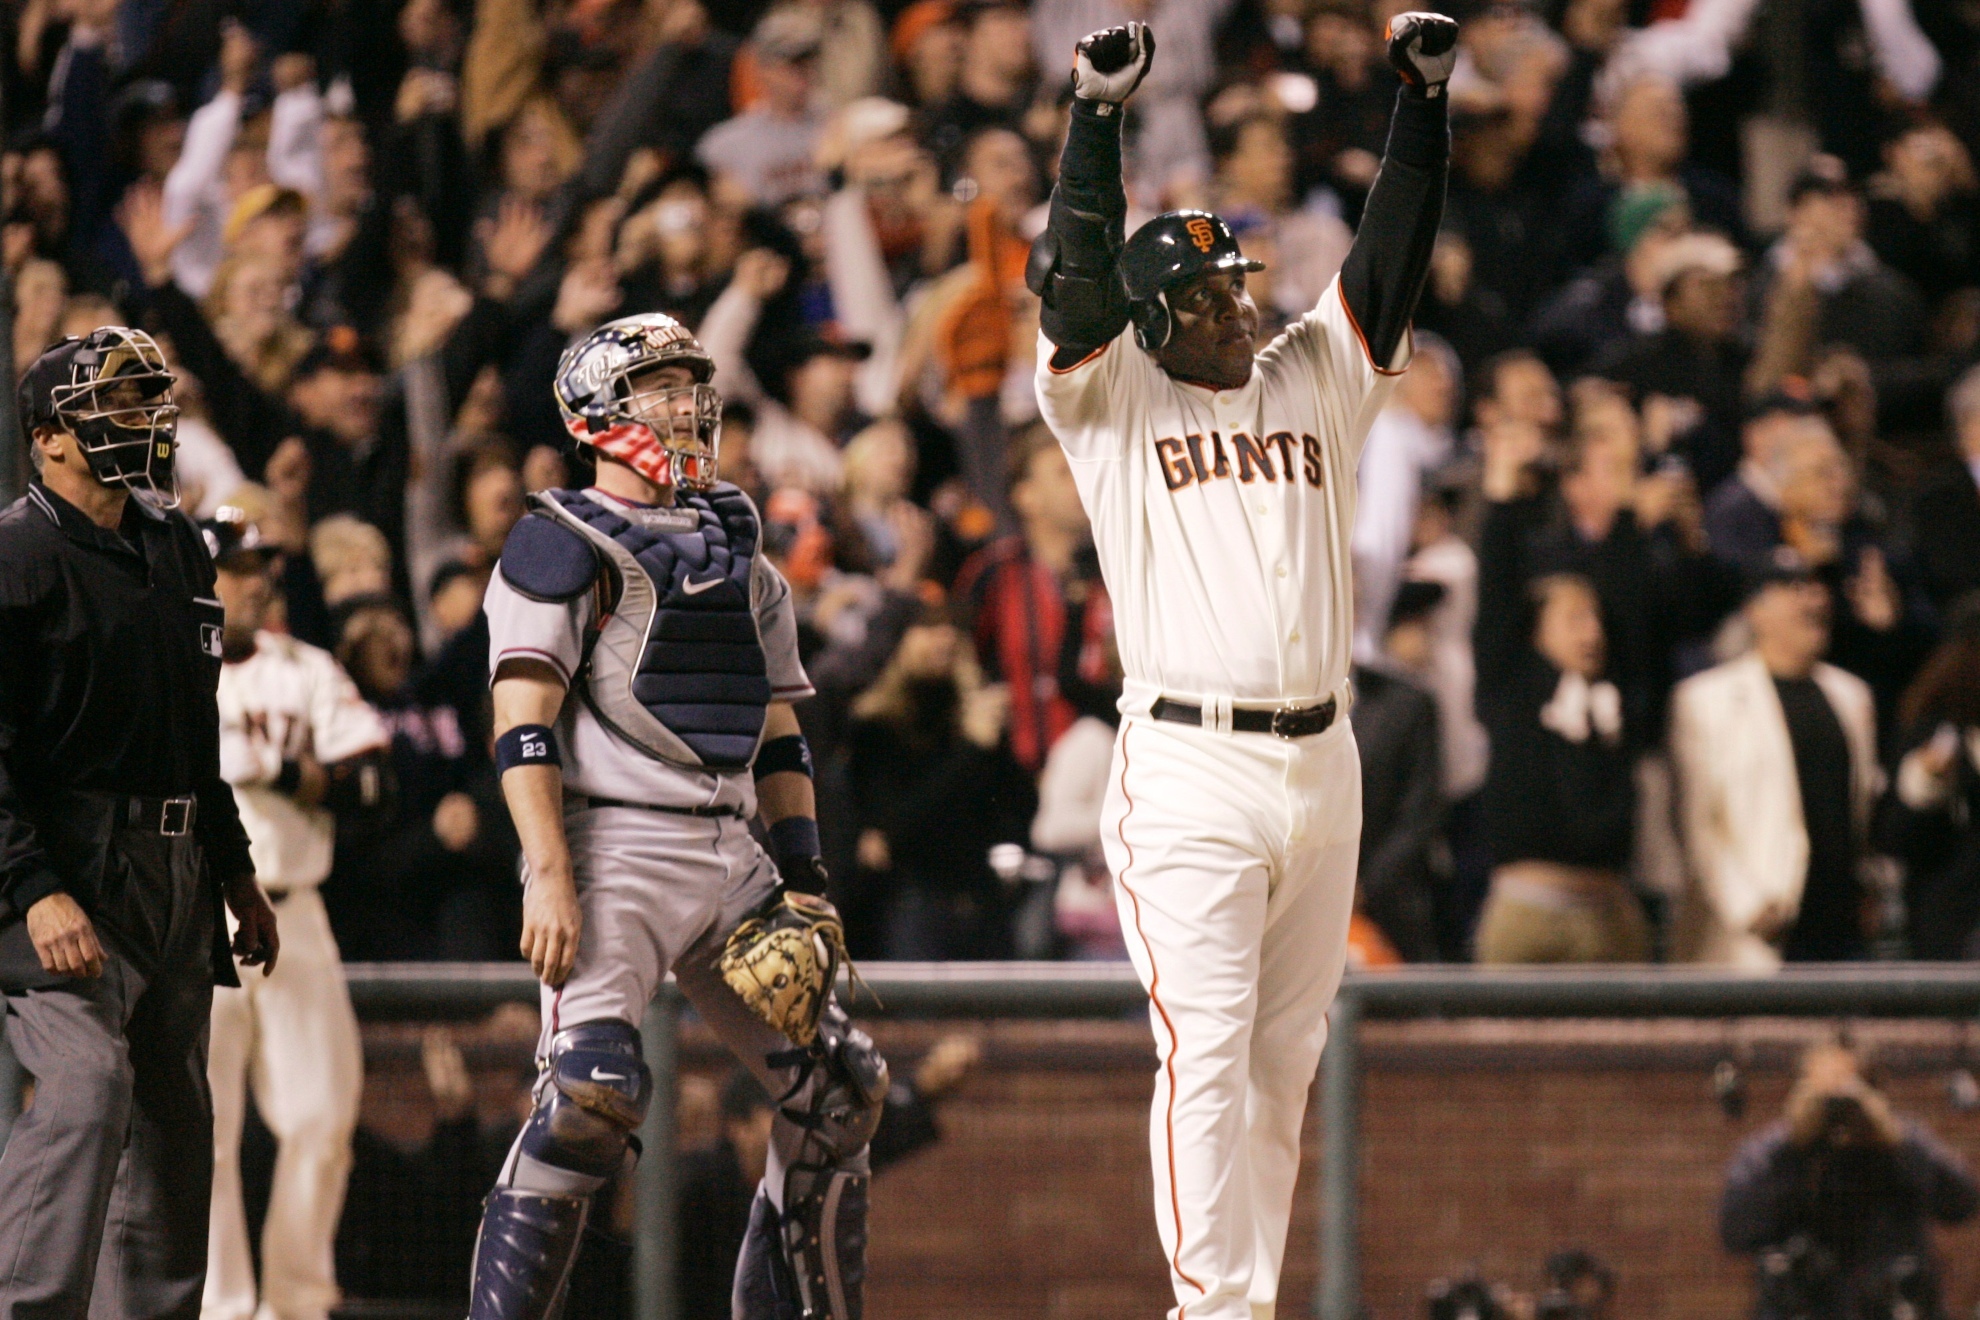 Barry Bonds during his prime at the San Francisco Giants.